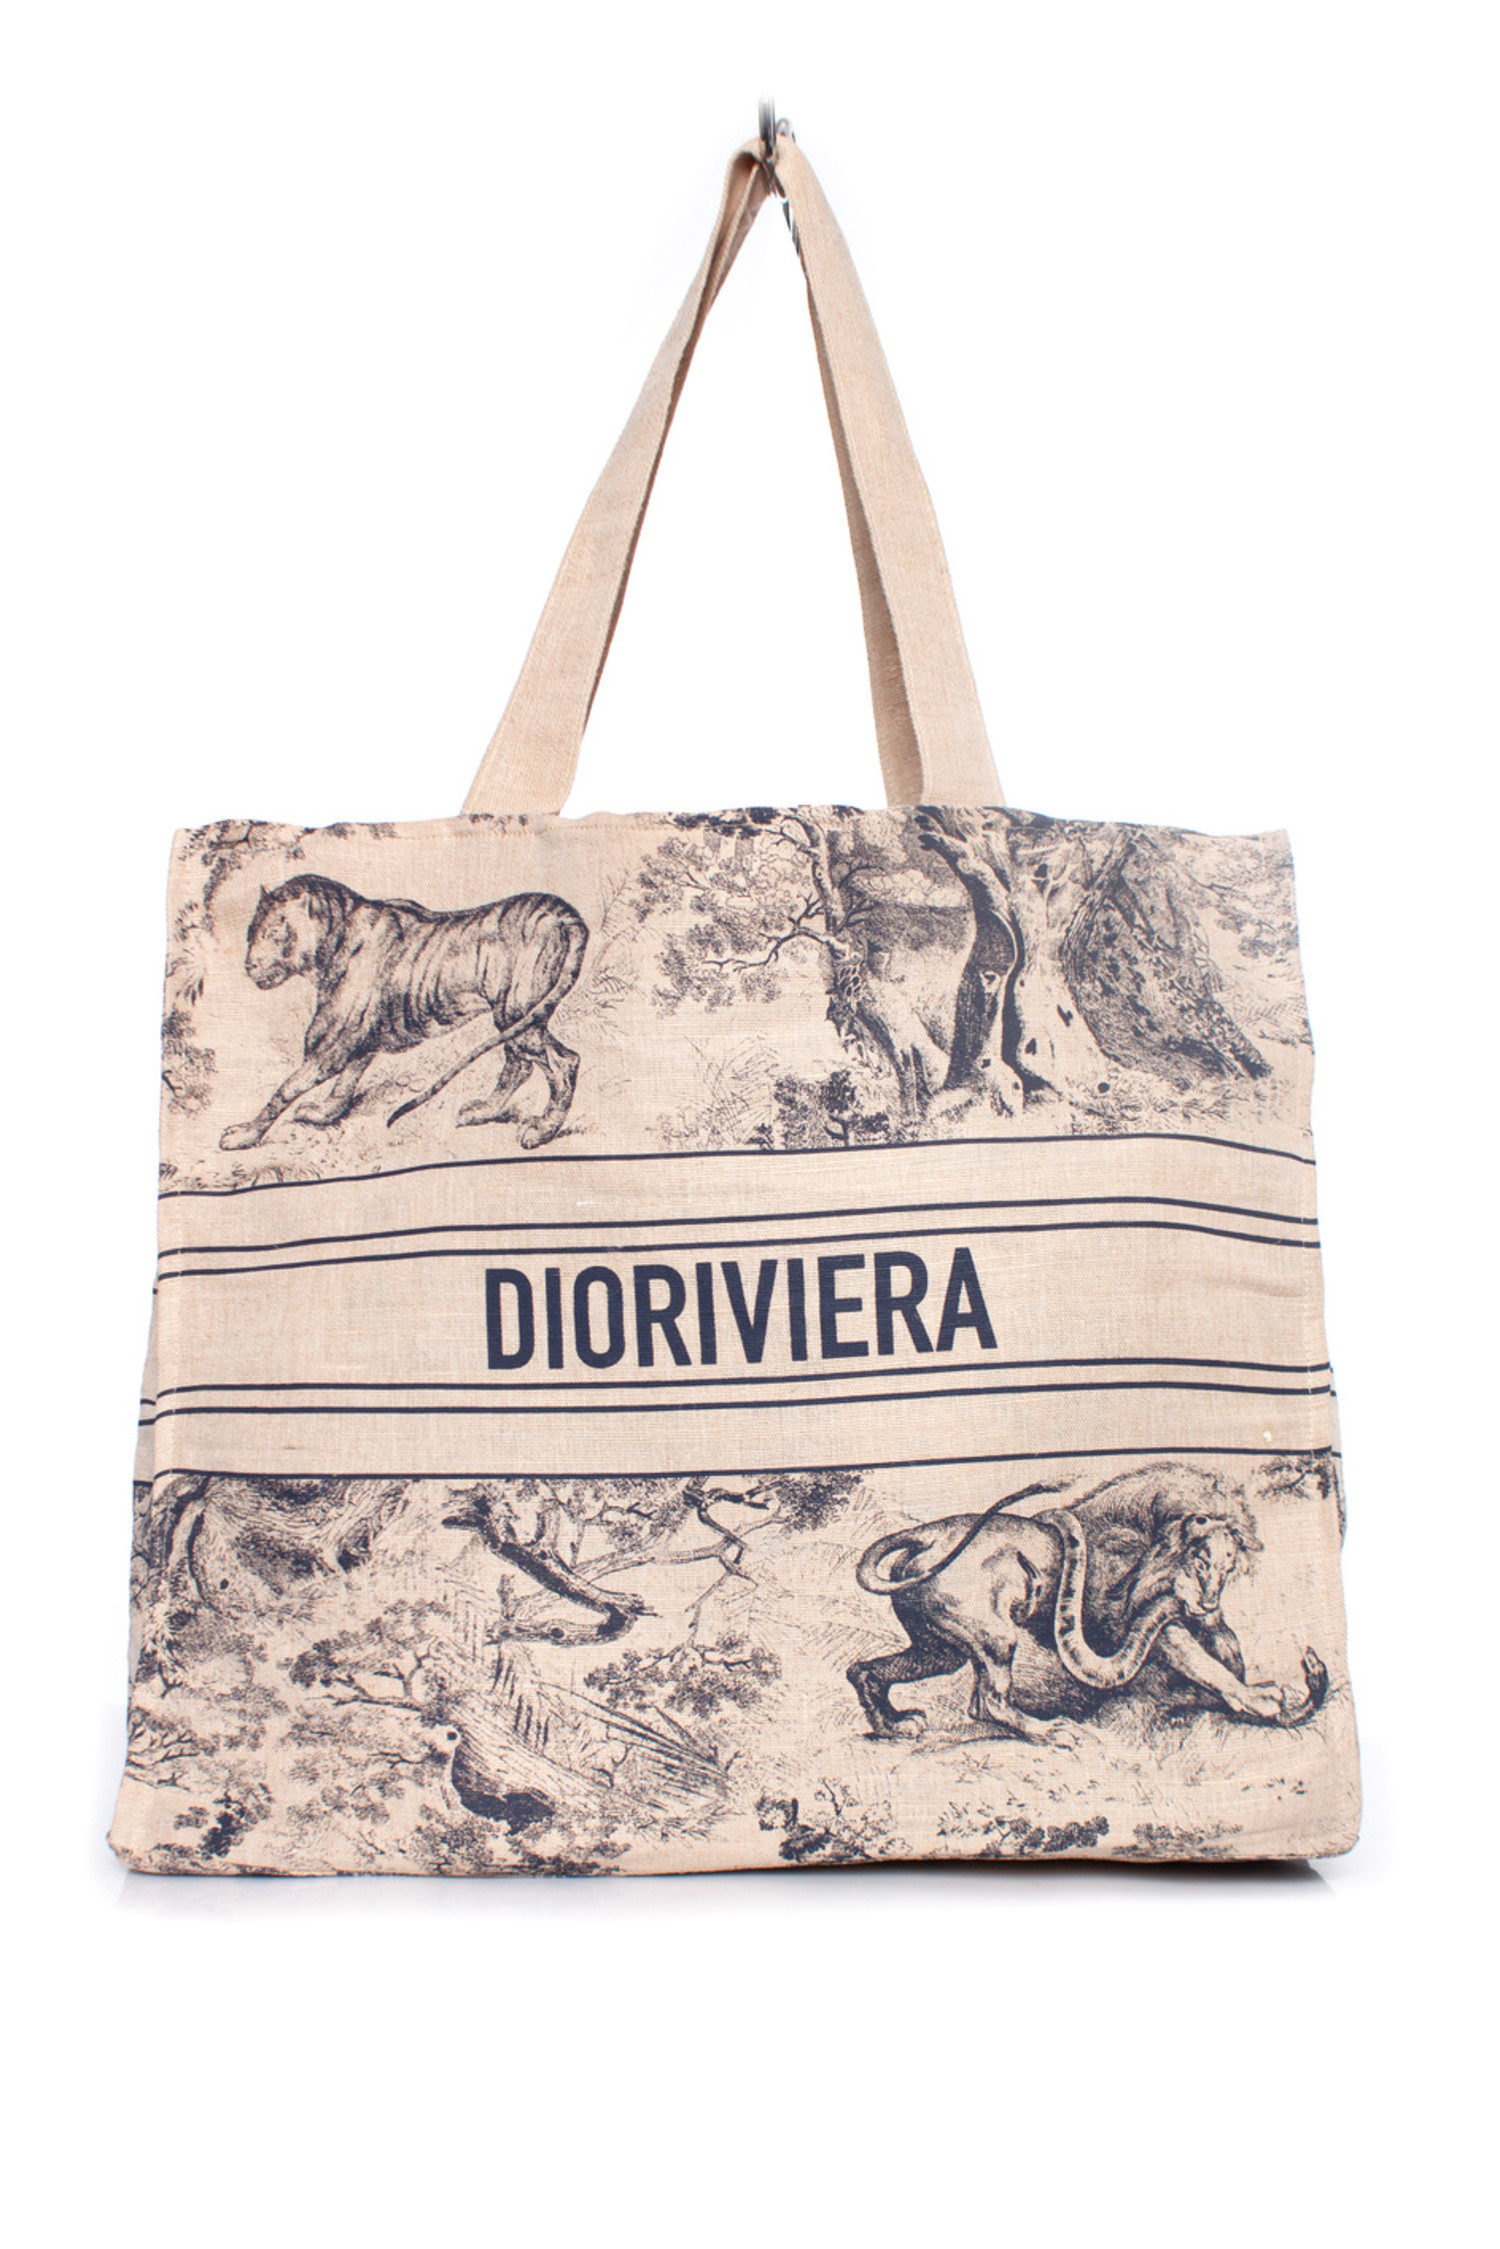 Dior book tote beach bag new cotton and linen size: 28 × 10 × 19 cm :  r/RepladiesDesigner